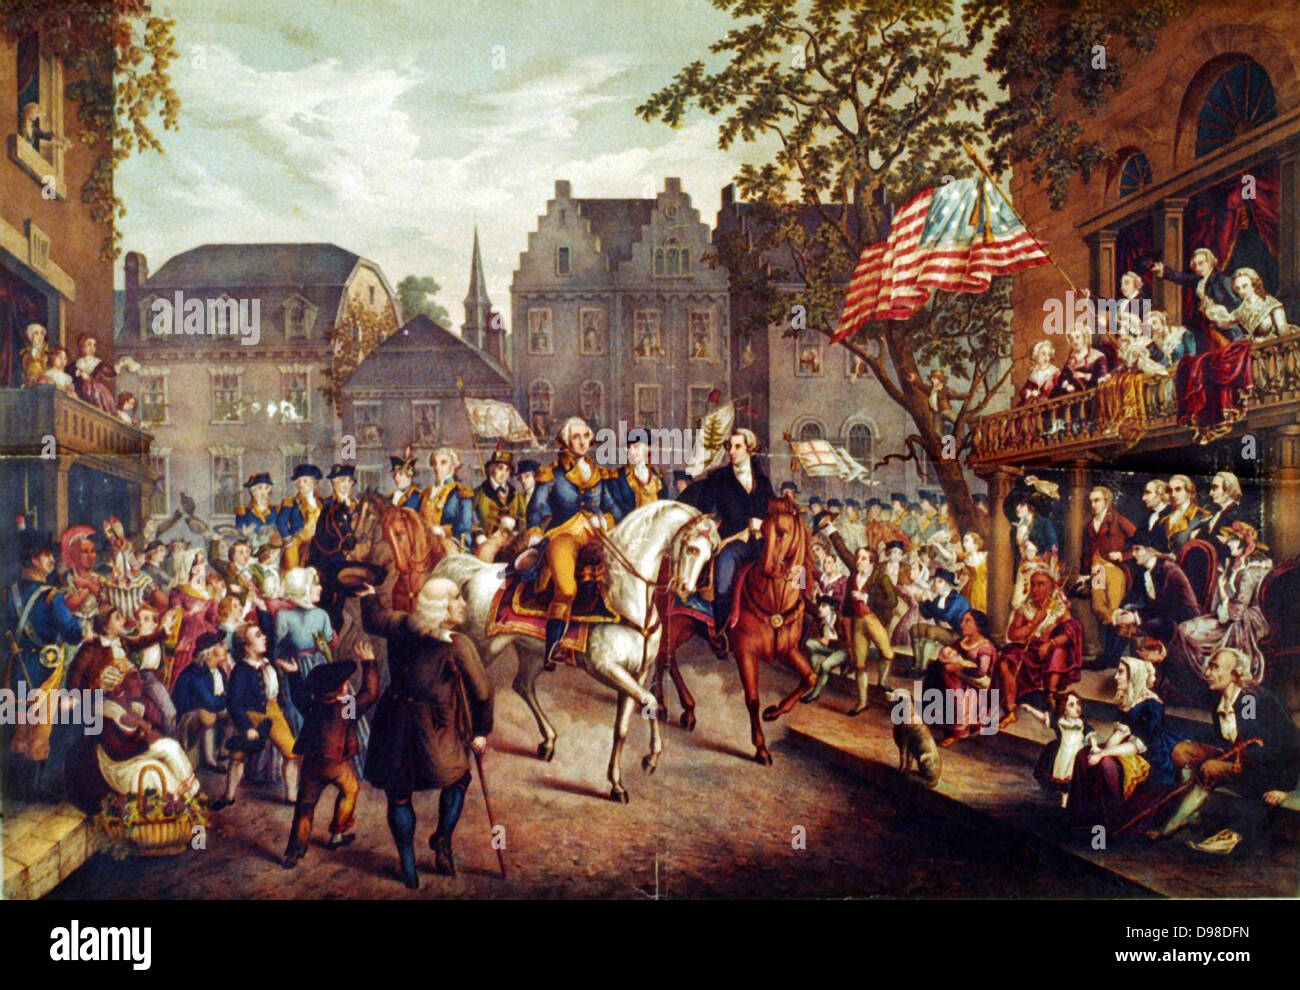 American Revolutionary War (American War of Independence) 1775-1783: George Washington's triumphal entry into New York, 25 November 1783. Late 19th century print. Stock Photo